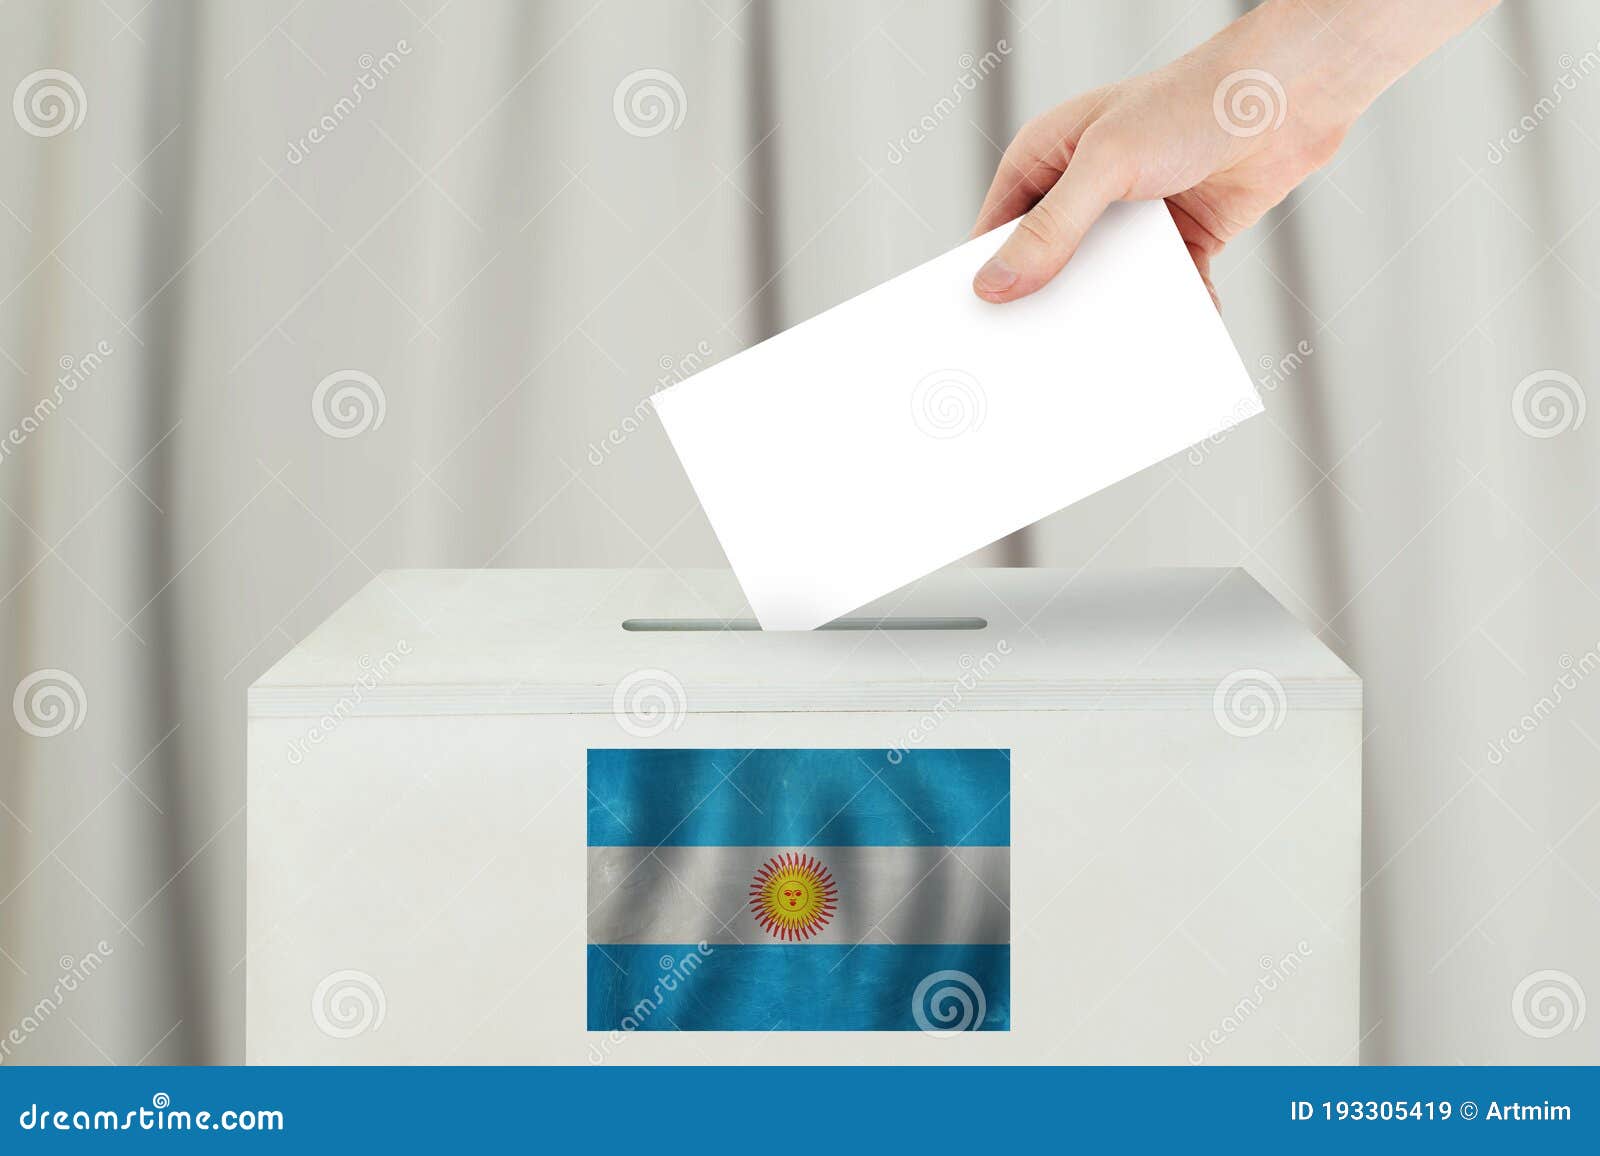 argentinean vote concept. voter hand holding ballot paper for election vote on polling station